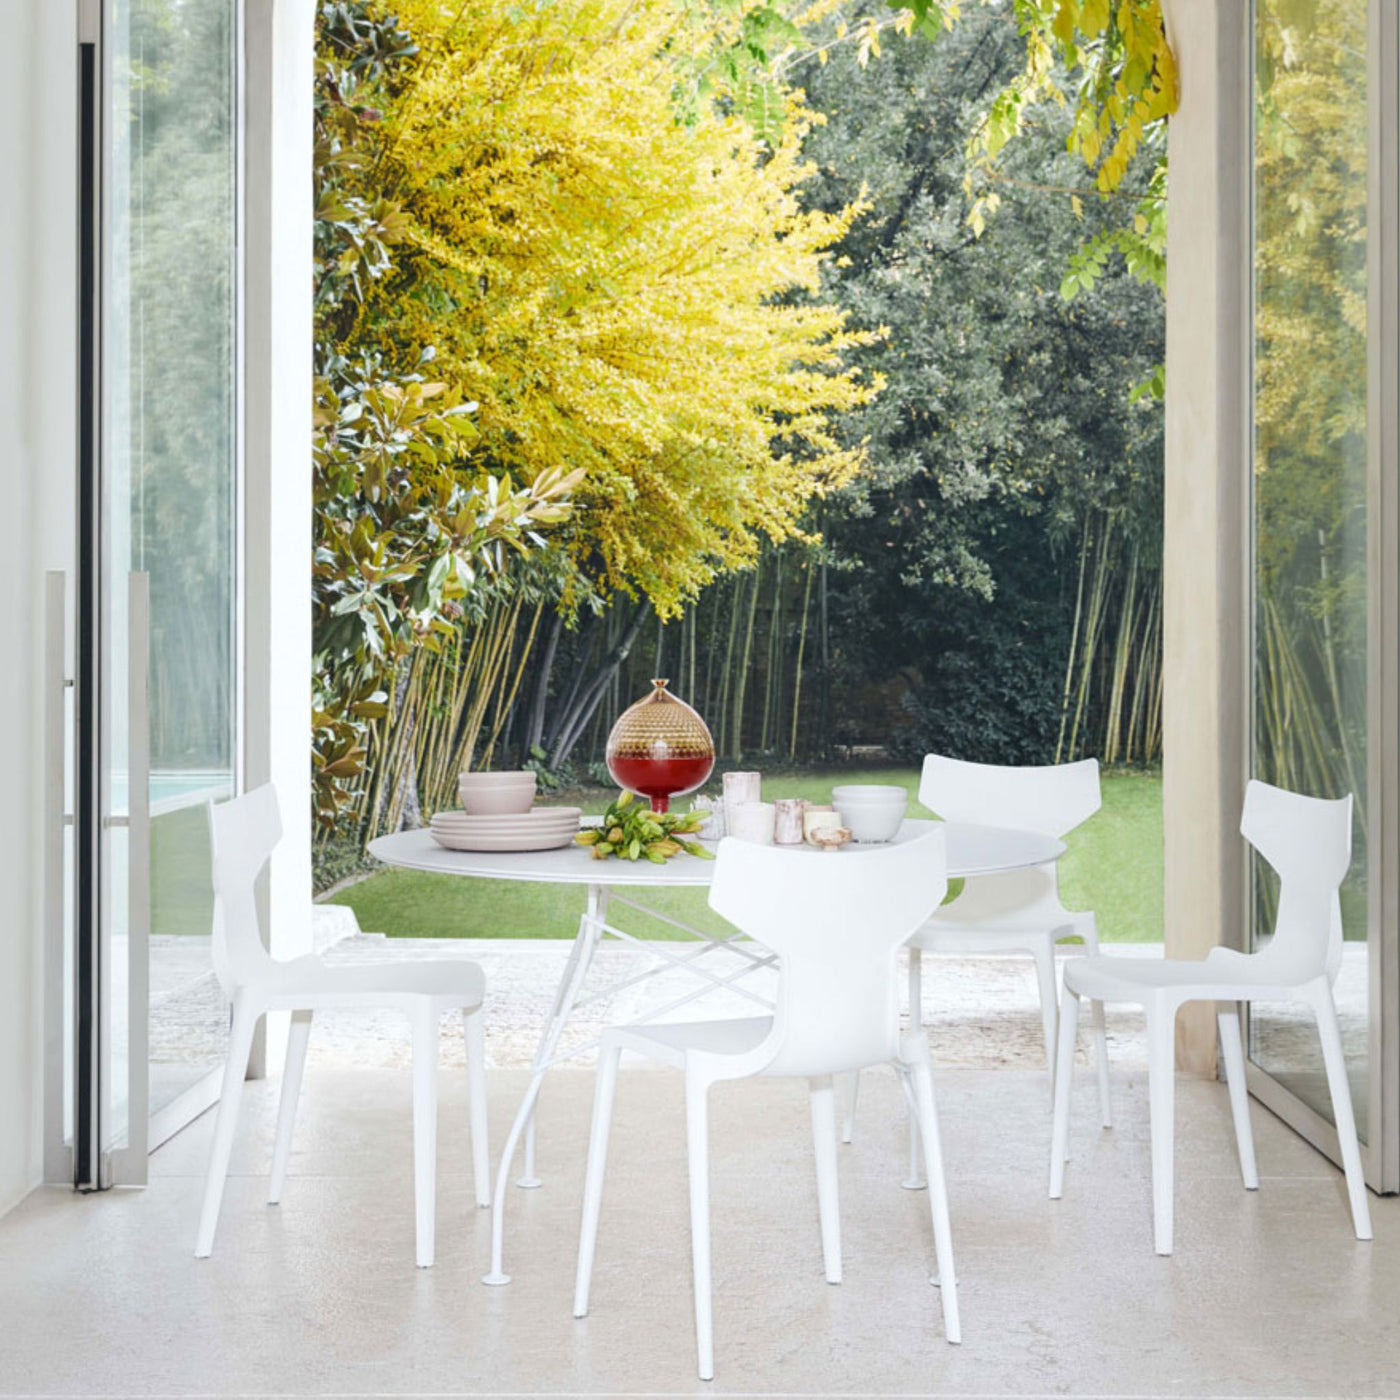 Kartell RE Chairs and Glossy Table by Antonio Citterio All White on Terrace of Italian Palazzo